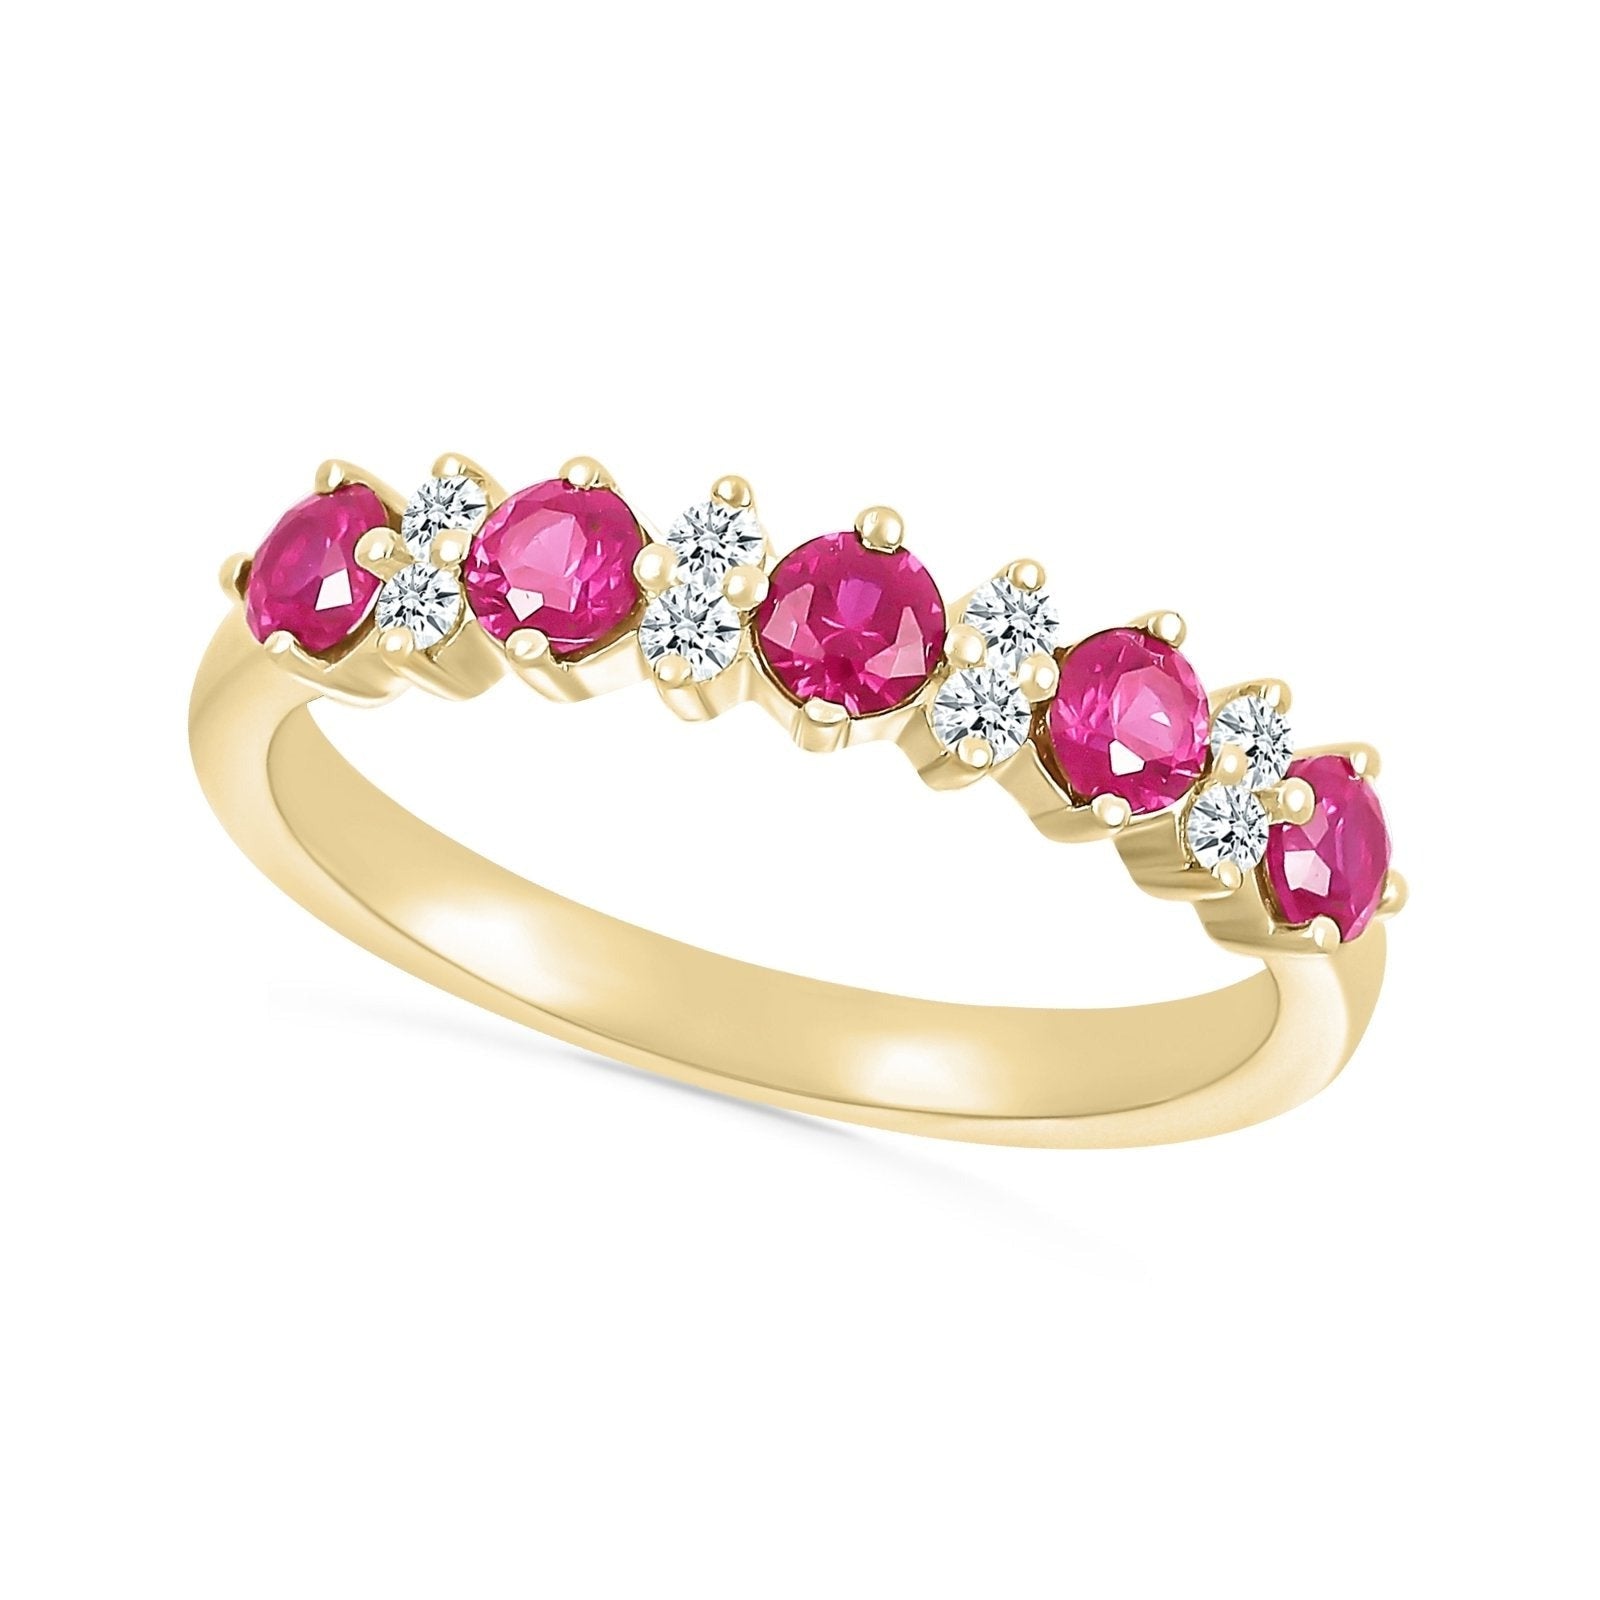 Ruby and White Sapphire Half Eternity Ring Rings Estella Collection #product_description# 32767 10k Birthstone Made to Order #tag4# #tag5# #tag6# #tag7# #tag8# #tag9# #tag10#